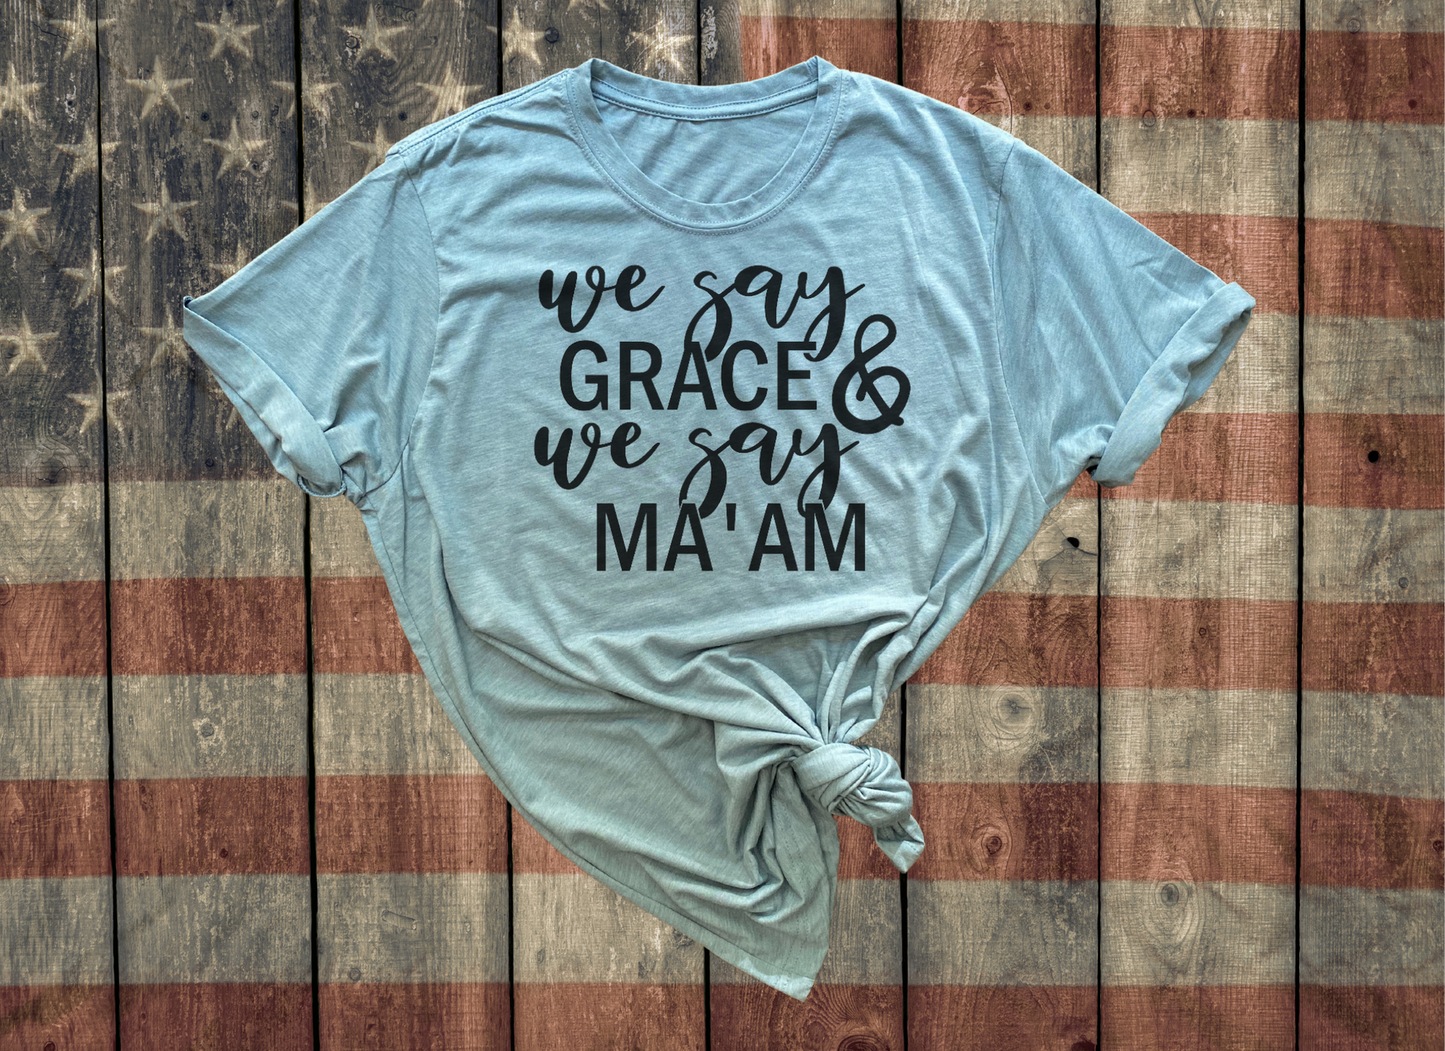 IMPERFECT SALE - We Say Grace & We Say Ma'am - Country Music Shirt